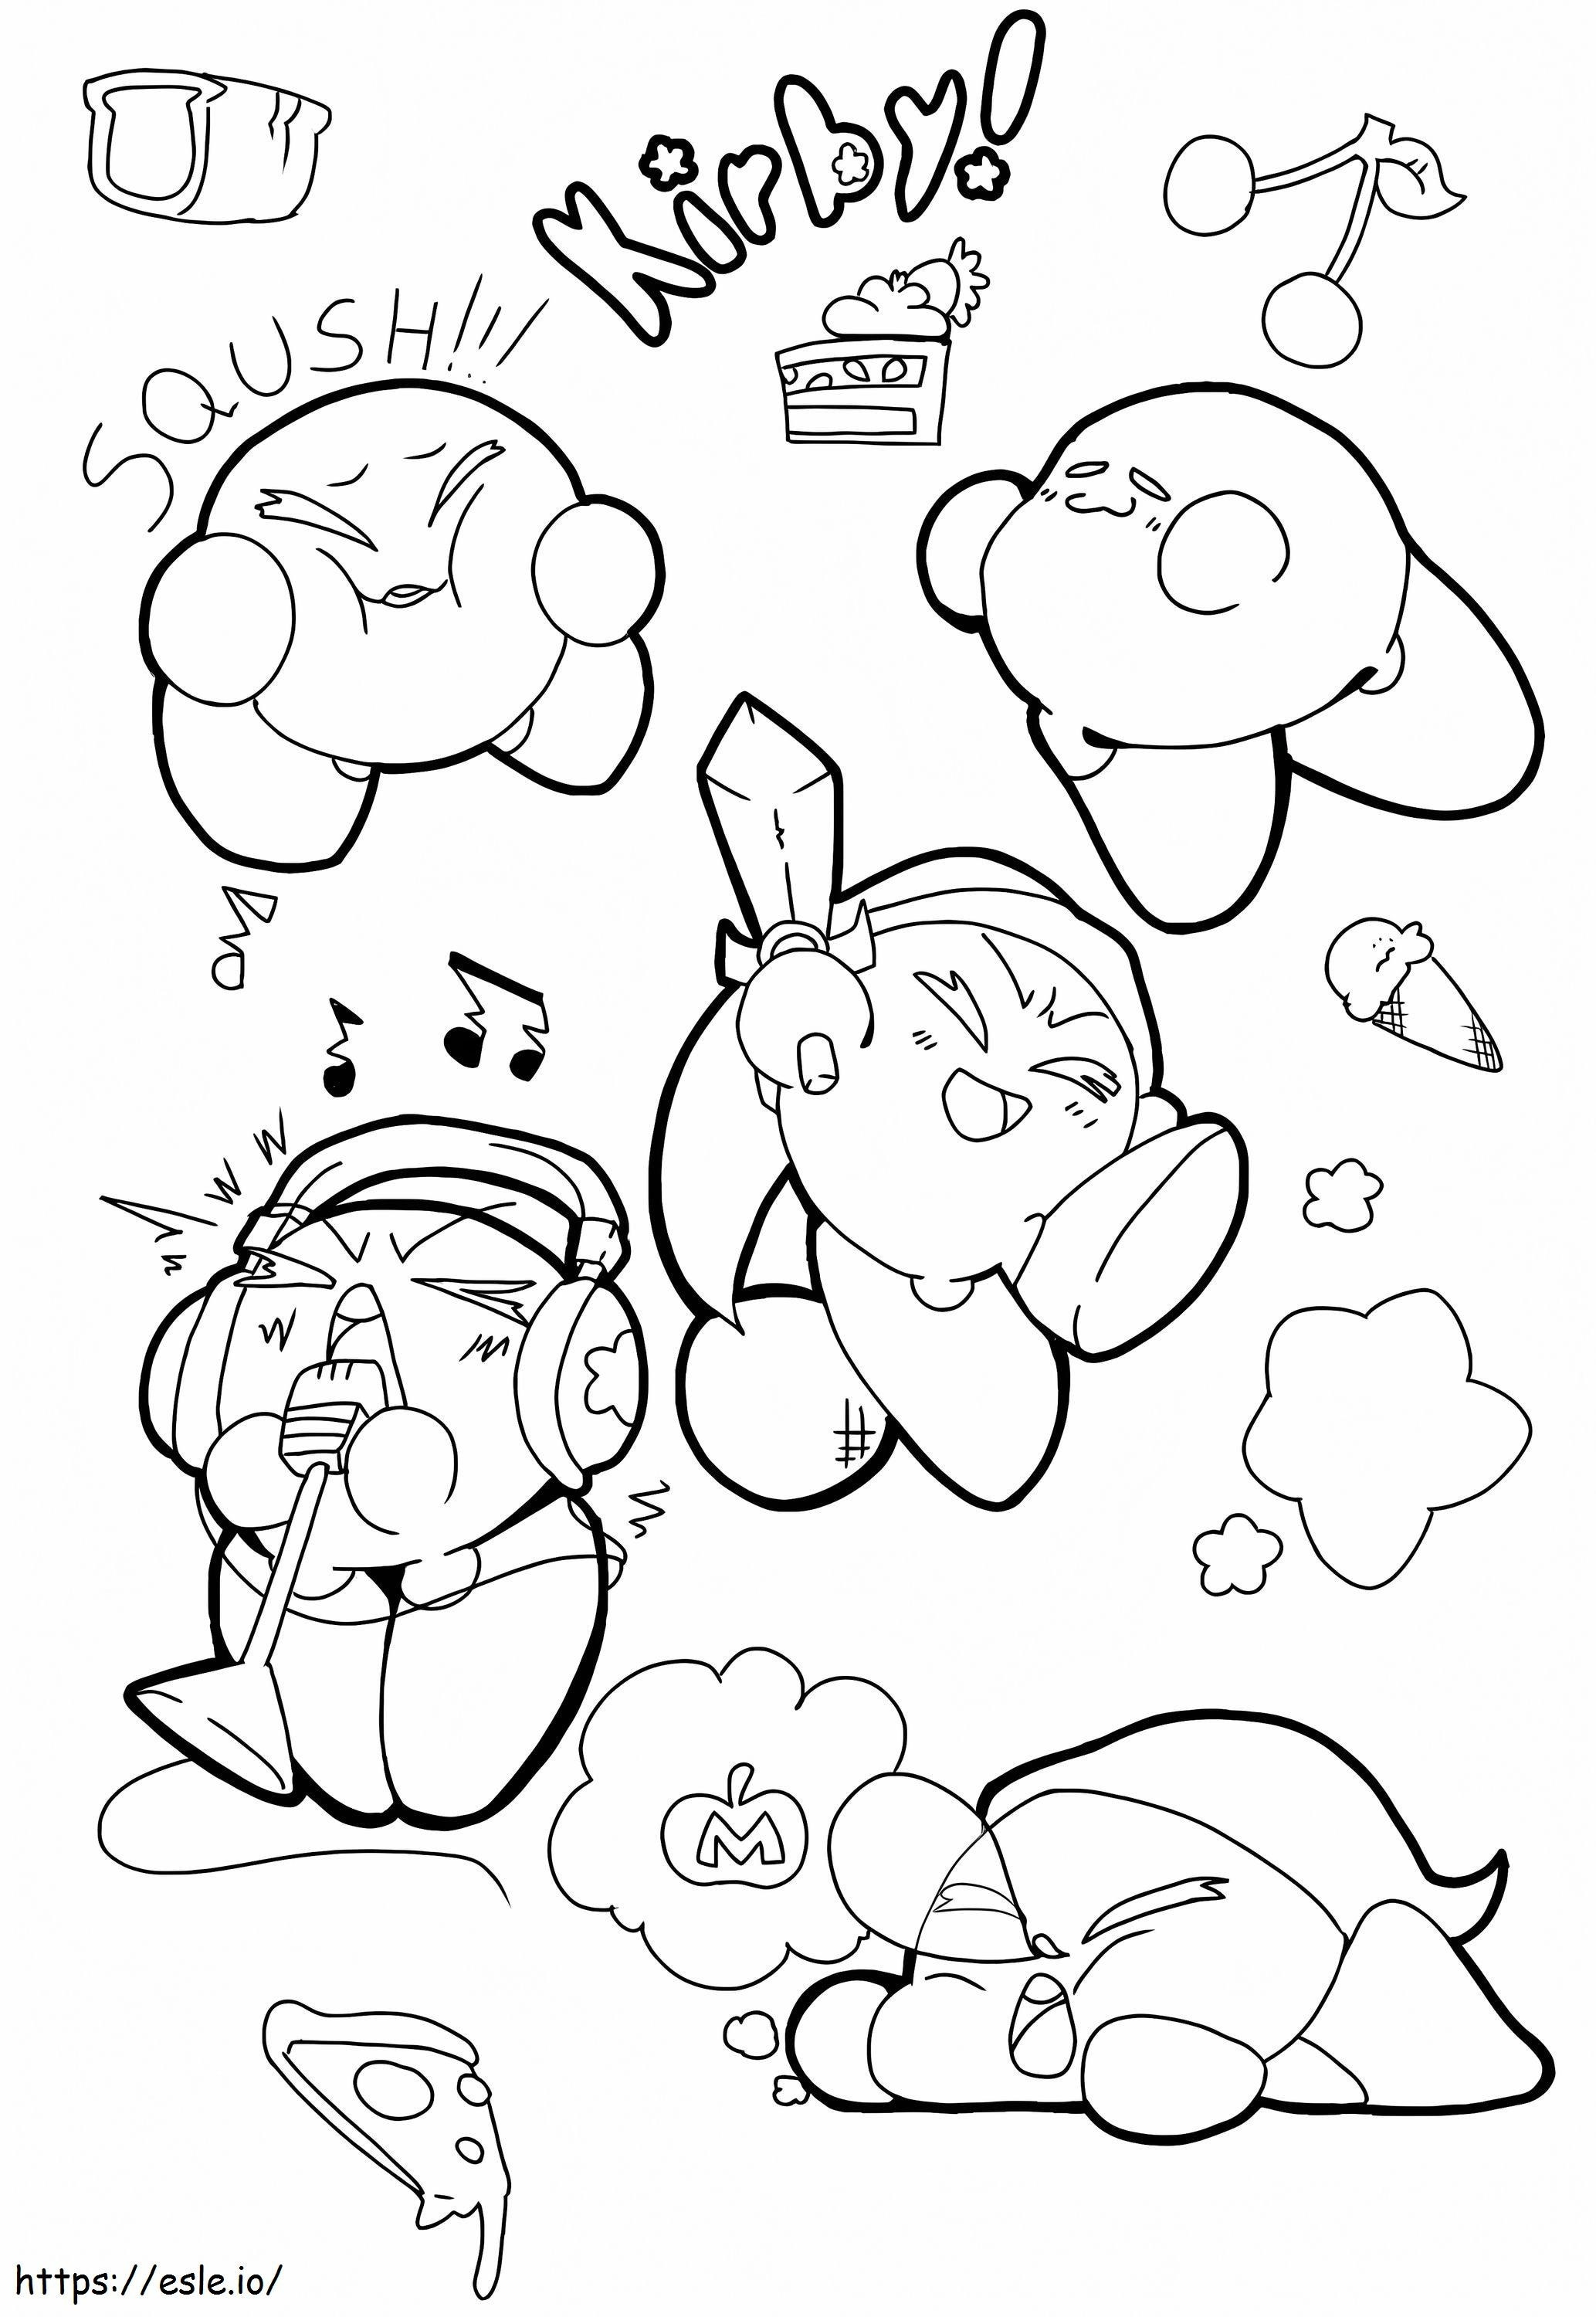 Kirby Basico coloring page